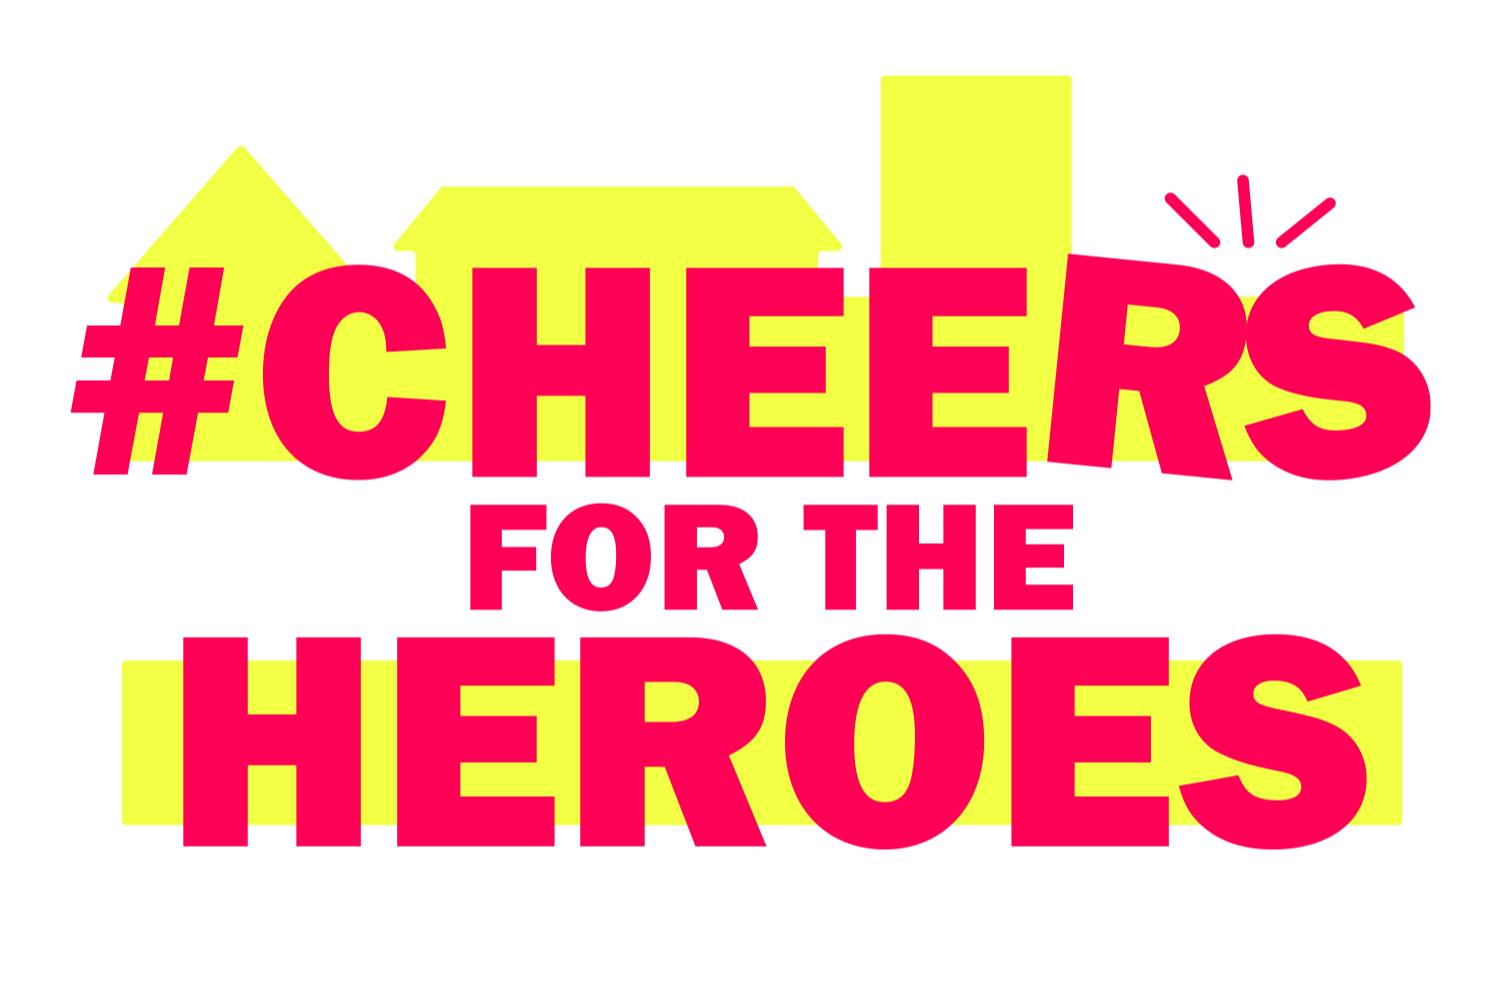 Cheers For The Heroes - UZ Brussel Foundation